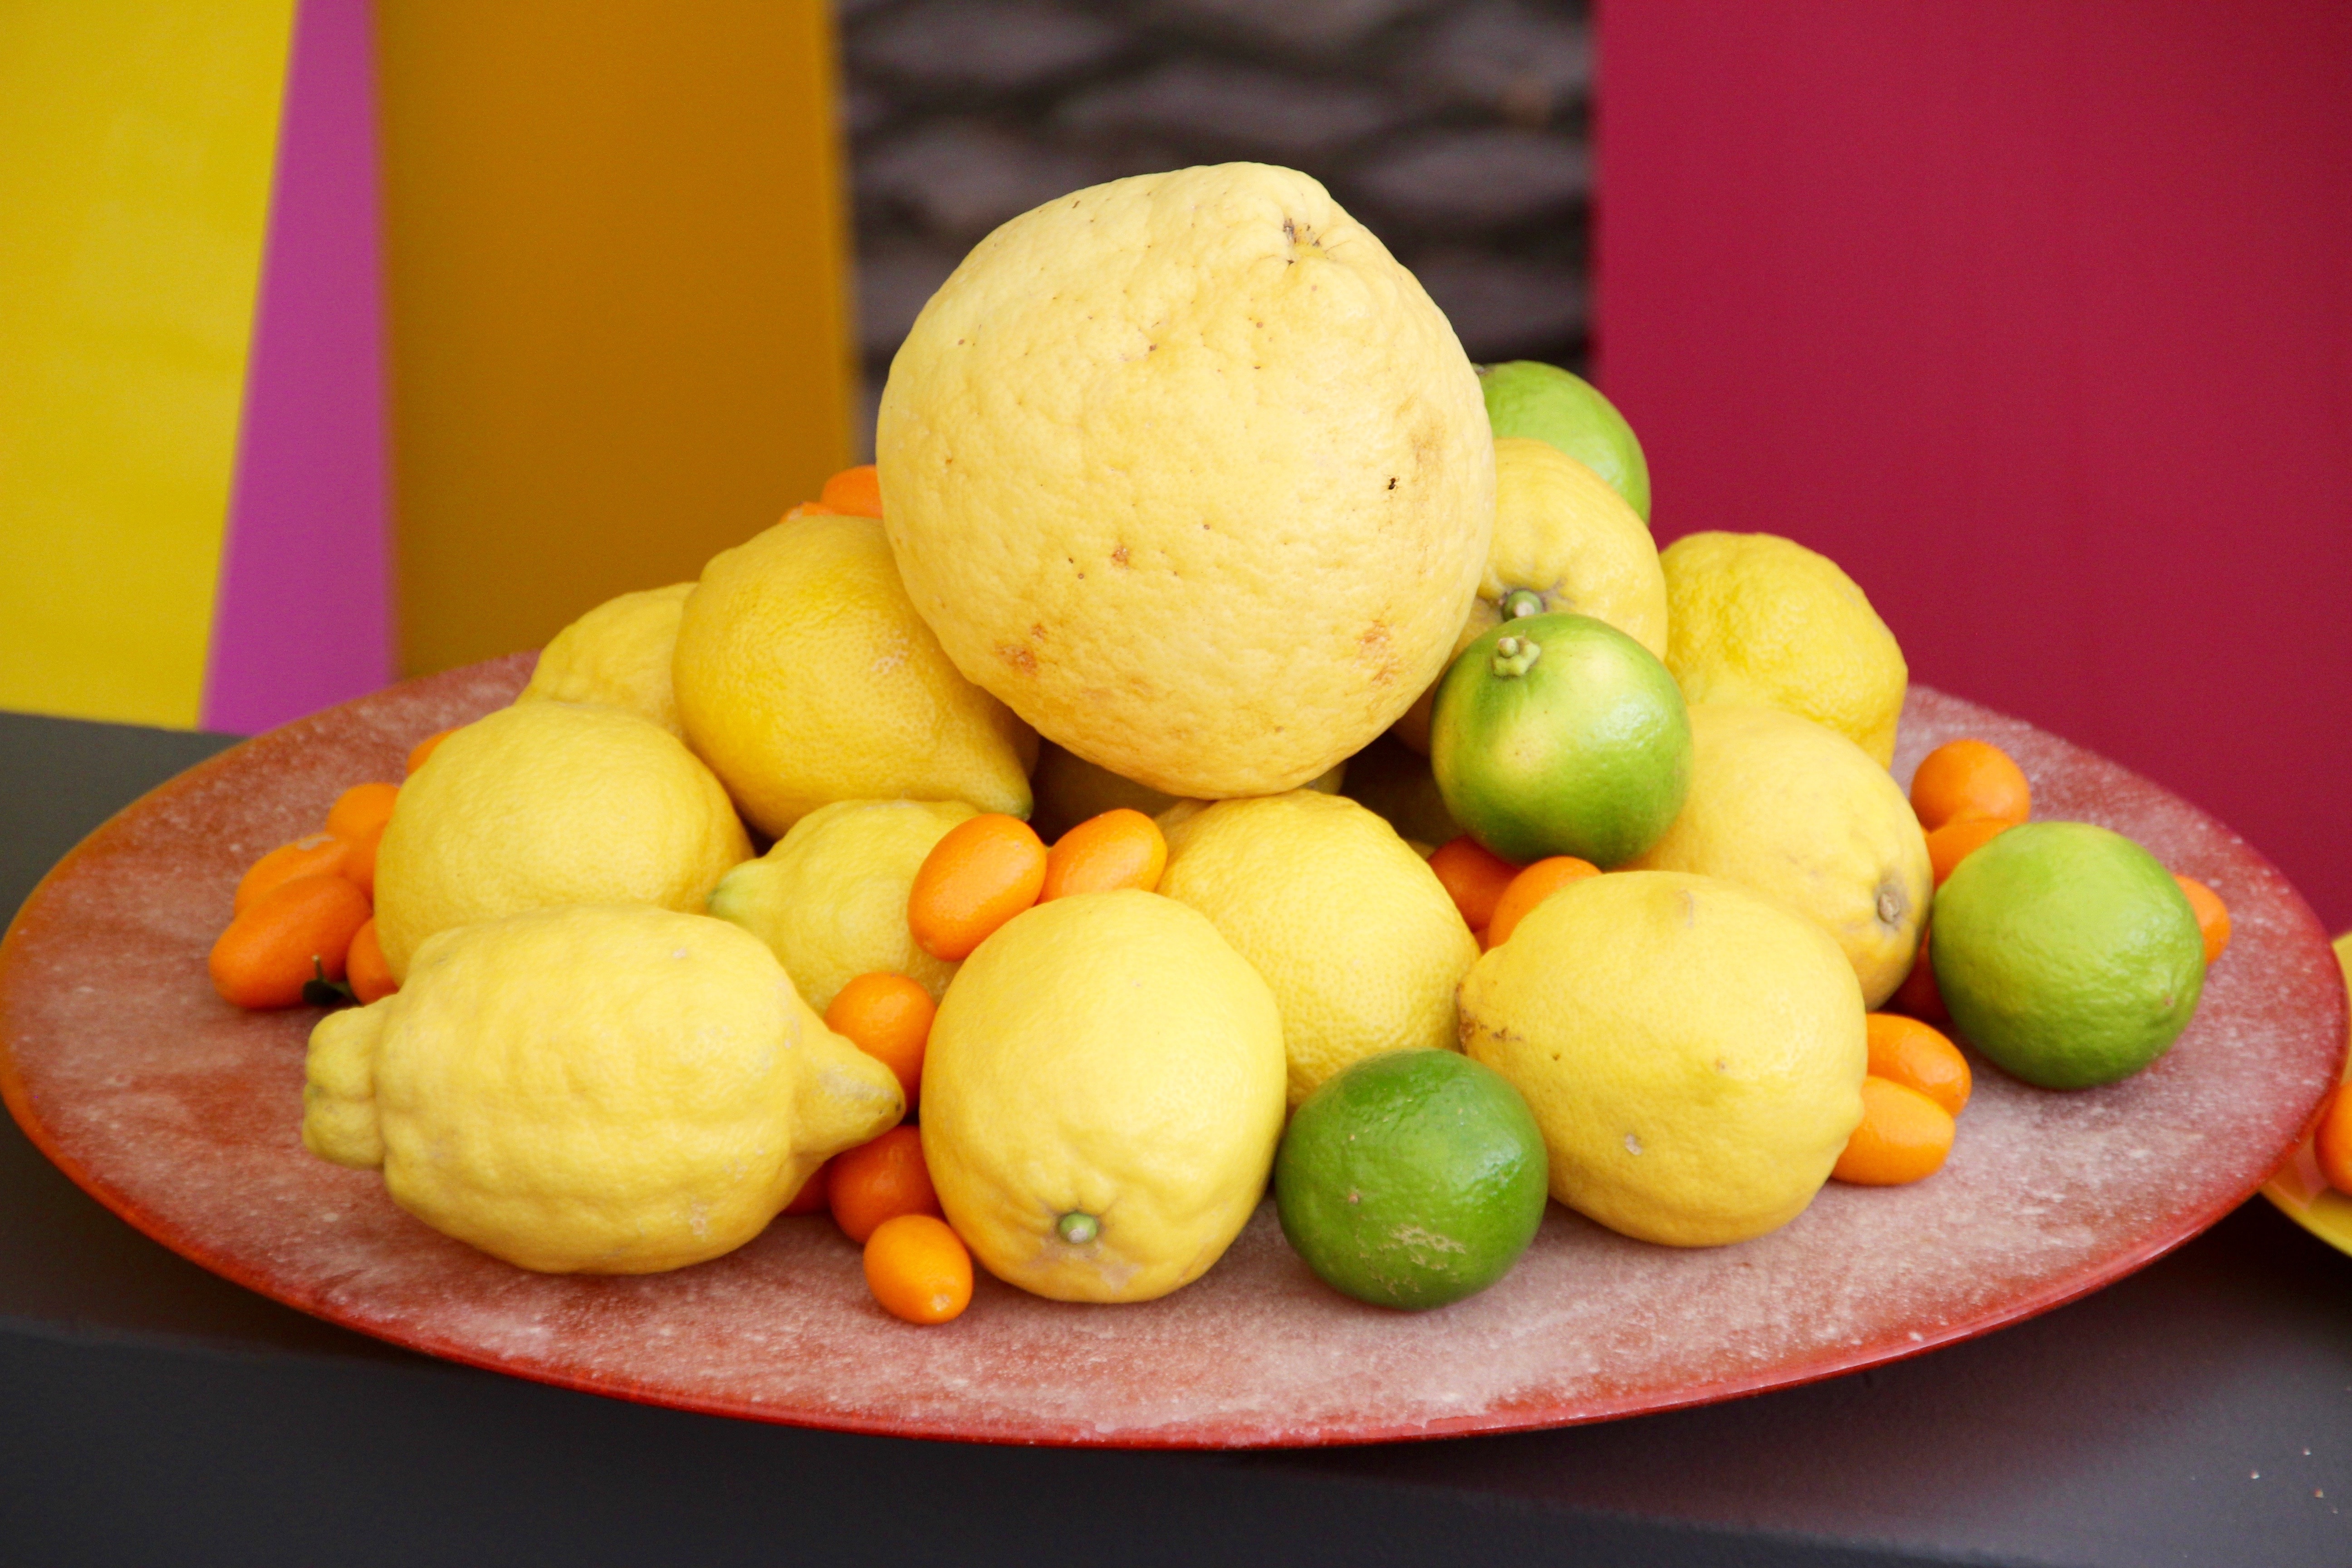 Lemons, Citrus Fruits, Lime, Yellow, food and drink, fruit